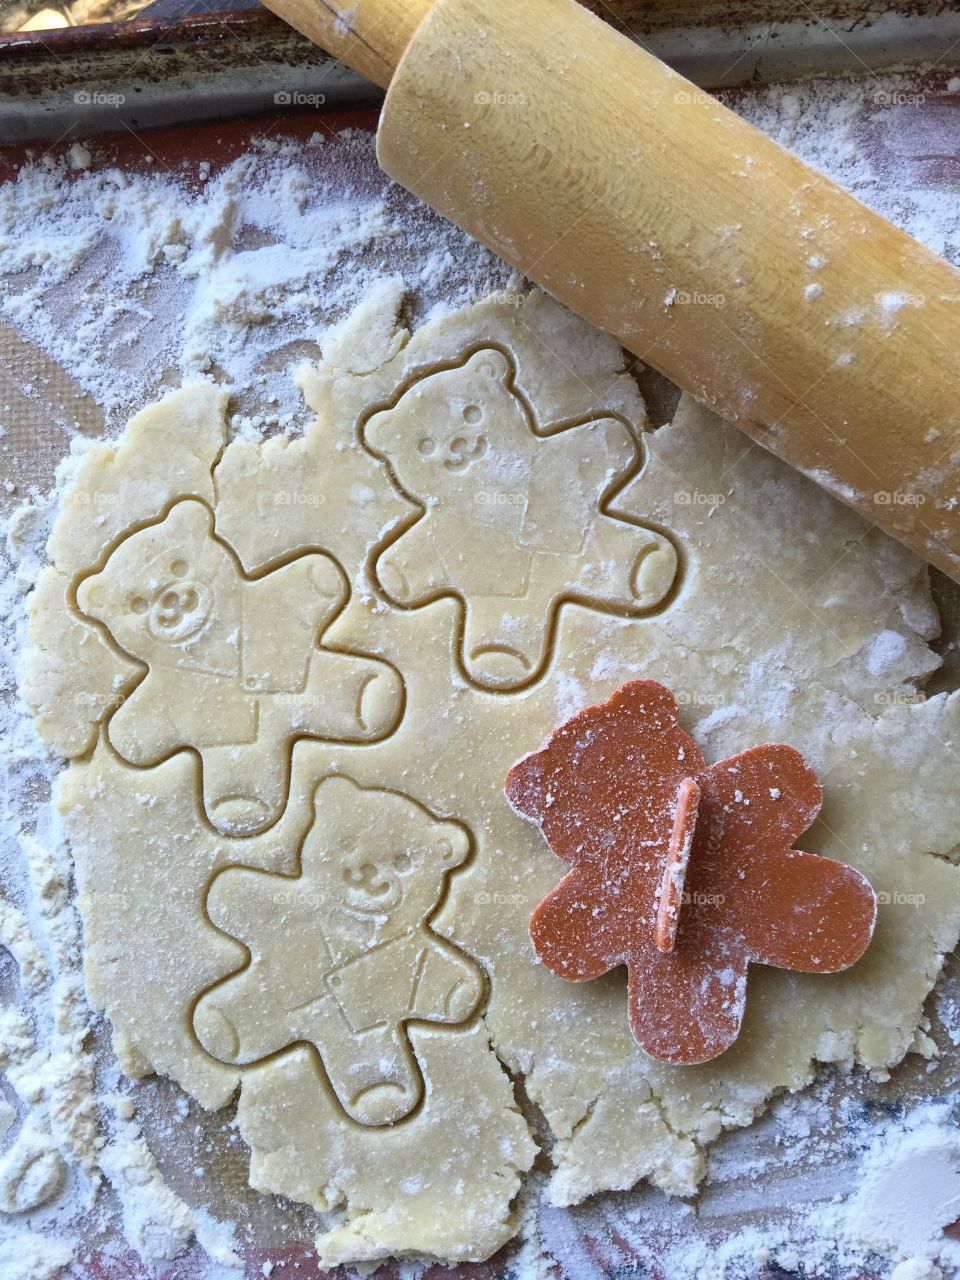 Cutting out teddy bear cookies